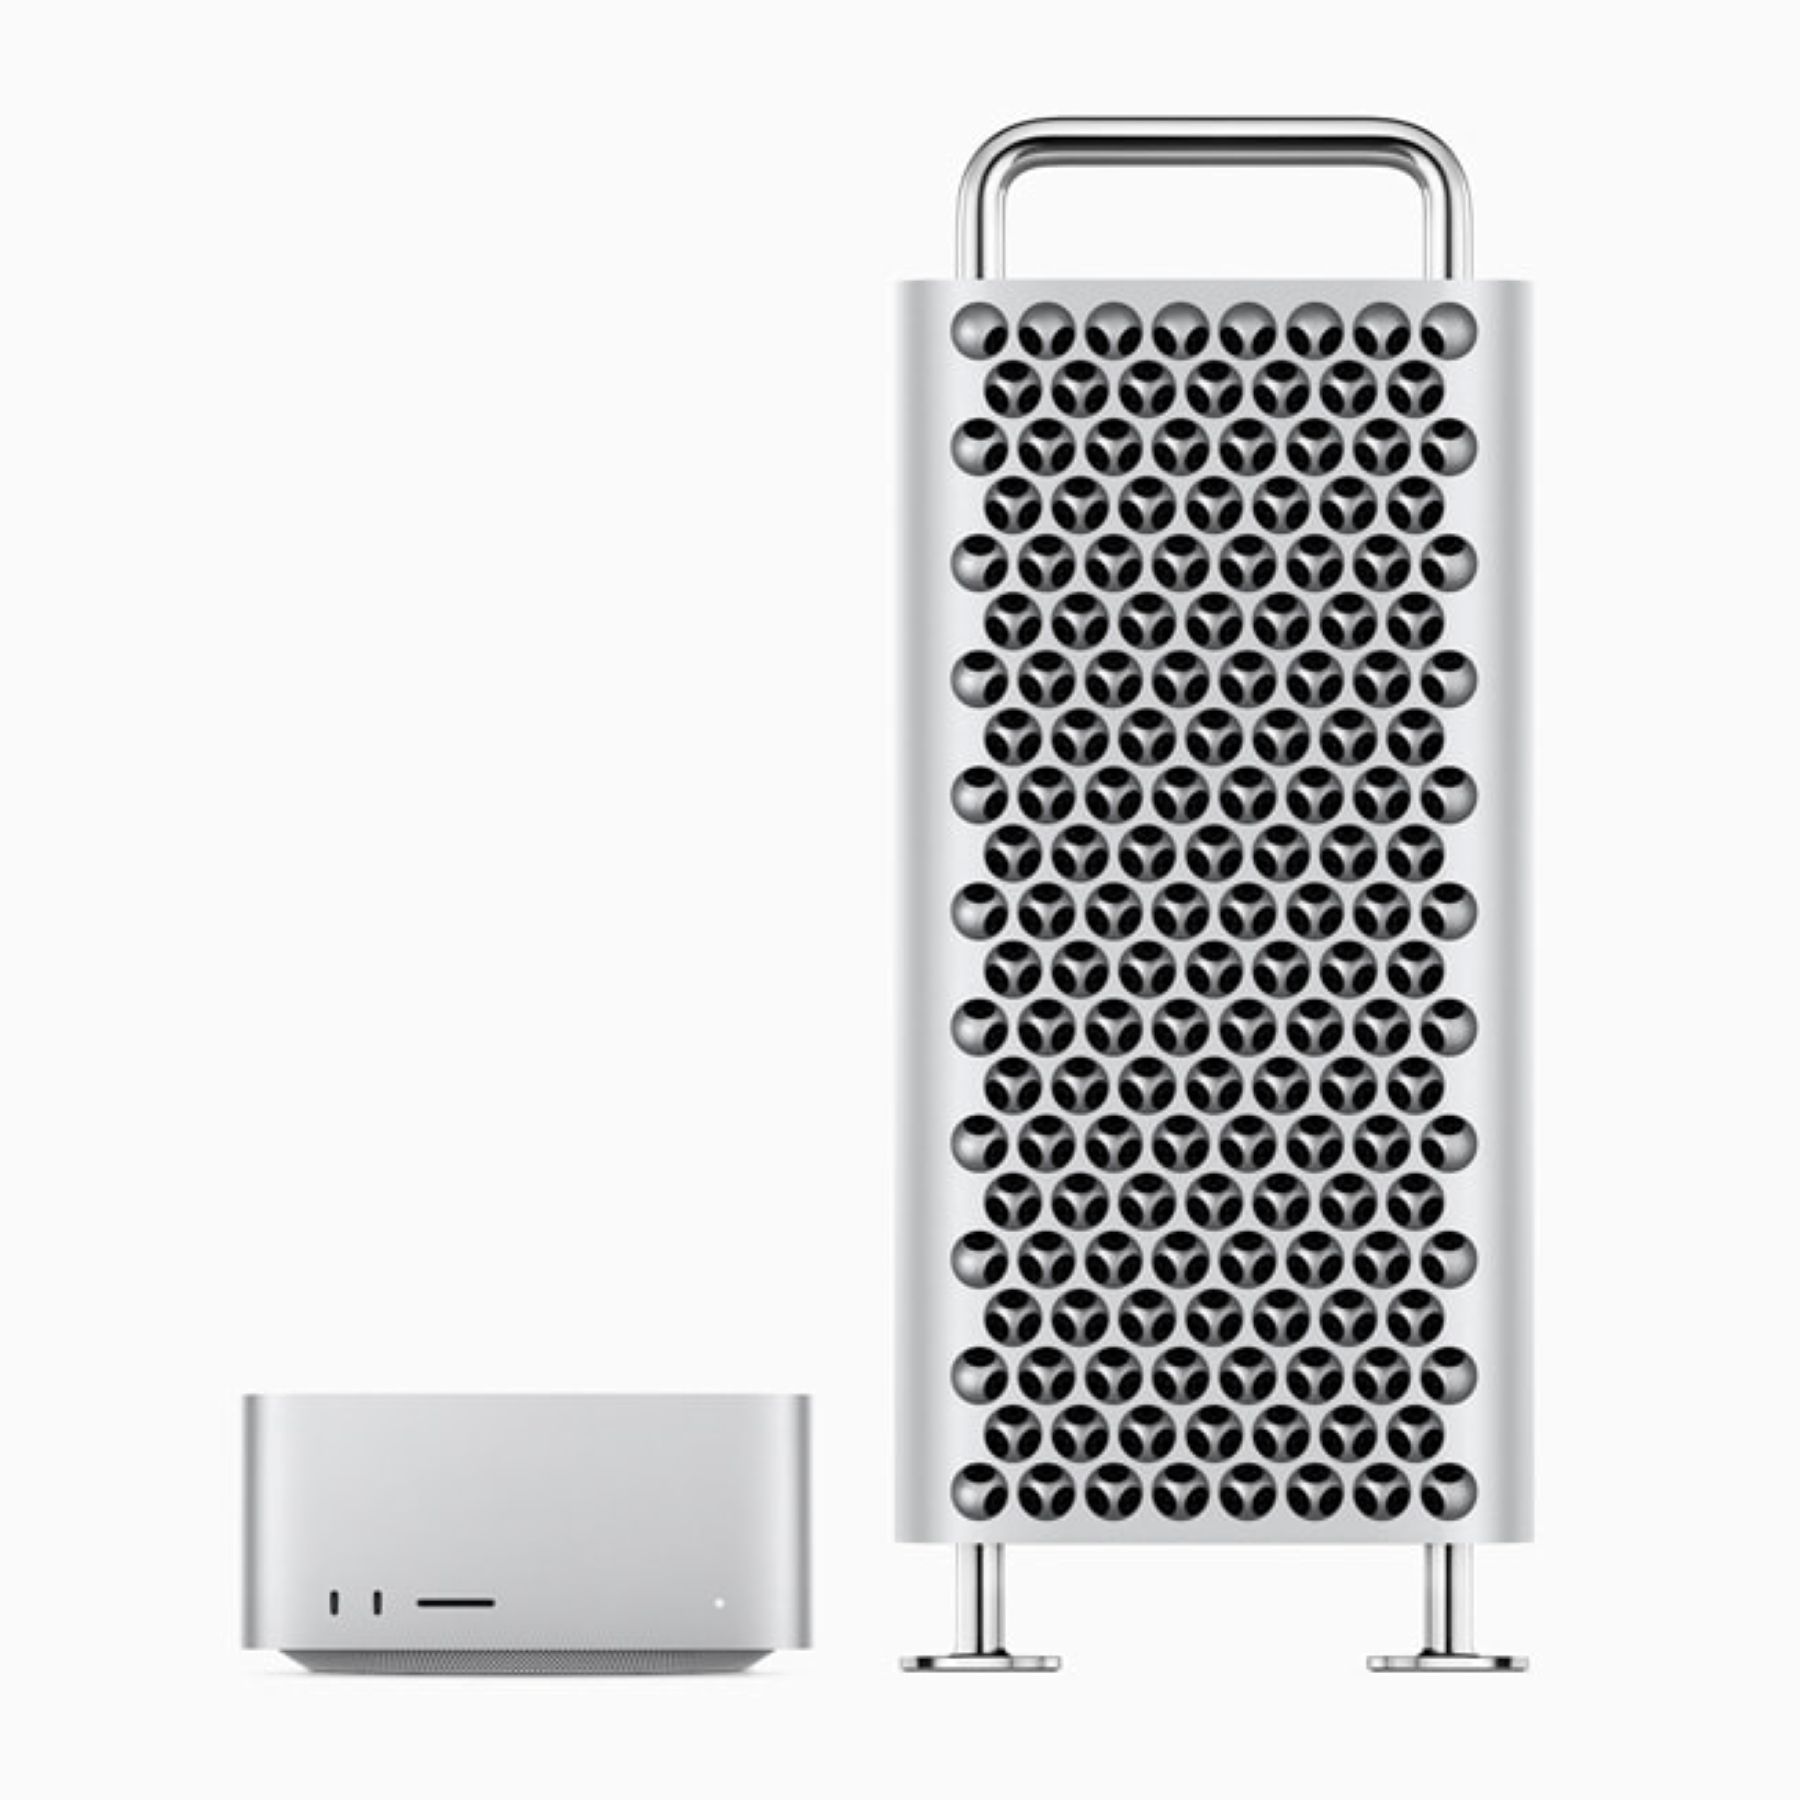 Apple unveils new Mac Studio and brings Apple silicon to Mac Pro